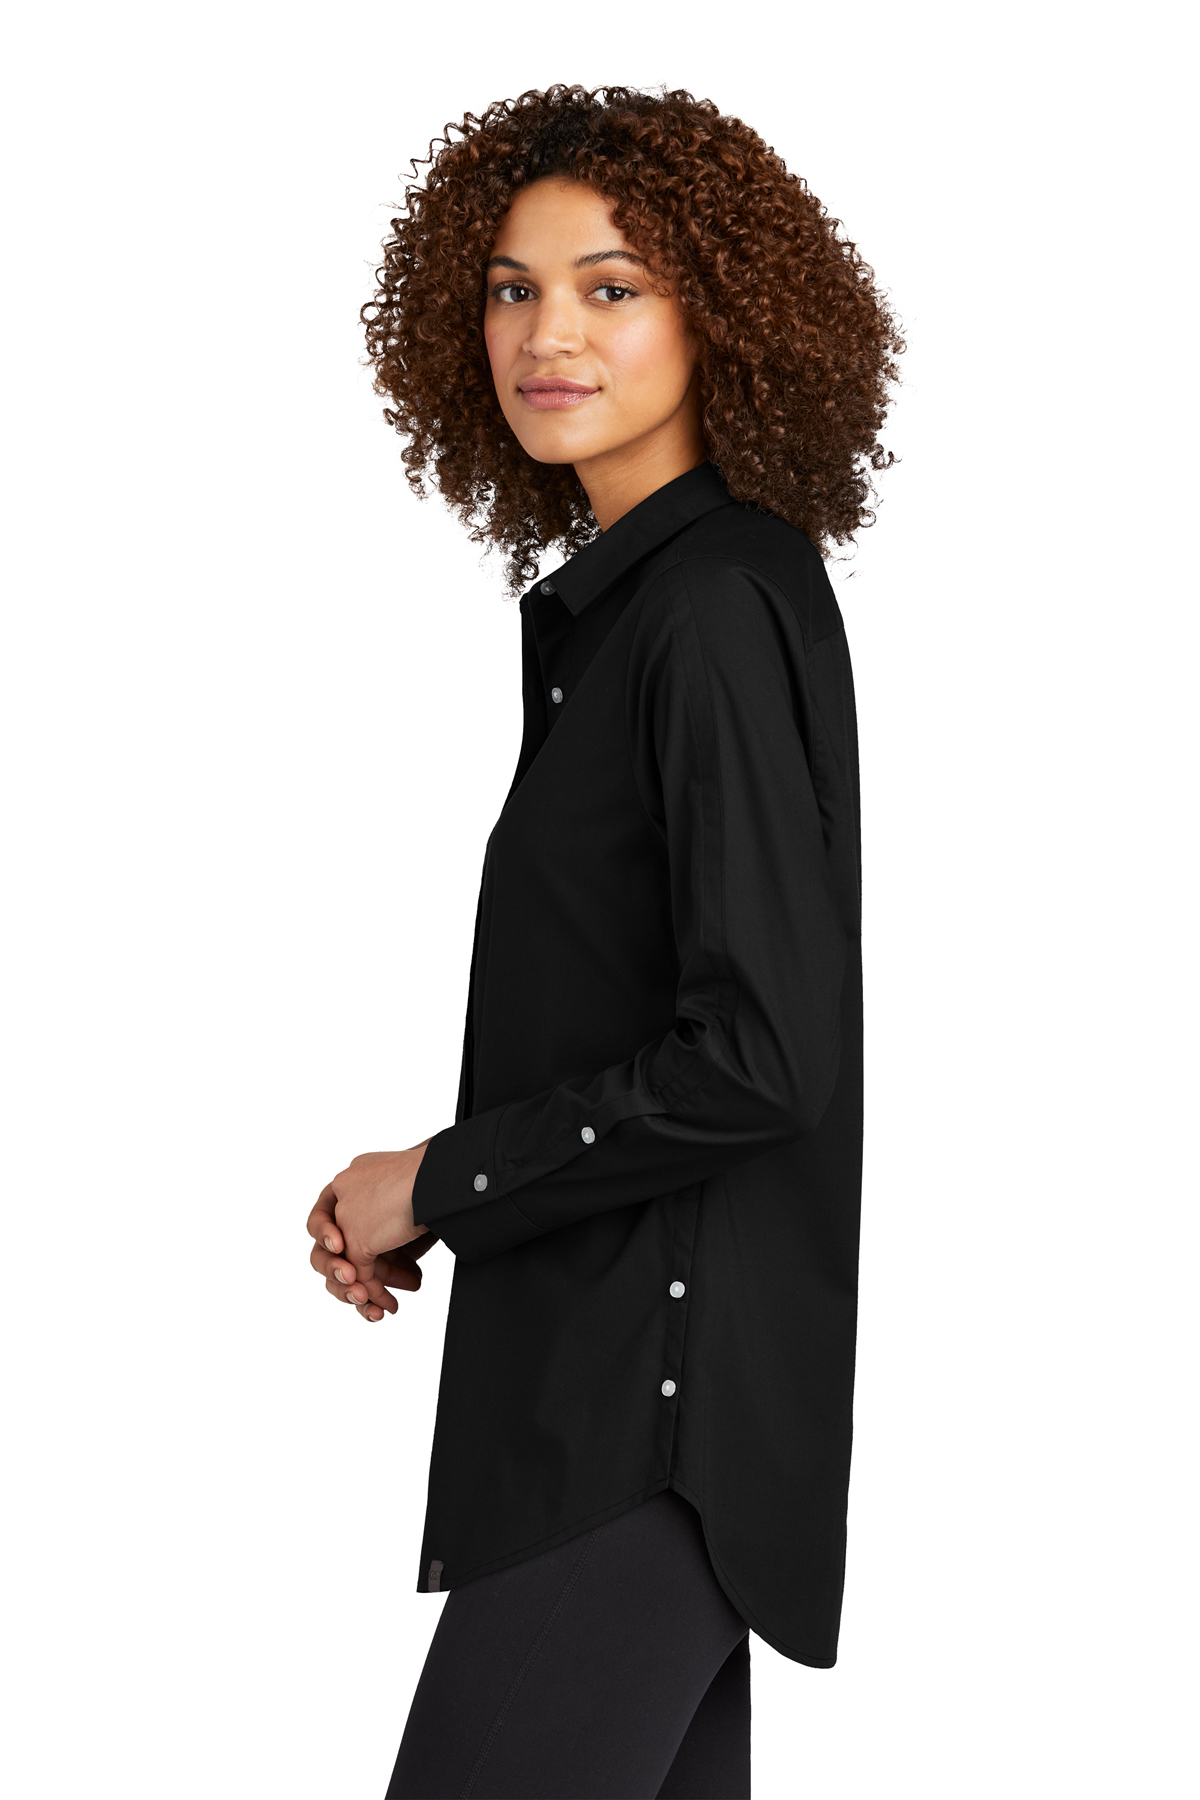 OGIO Ladies Commuter Woven Tunic, Product